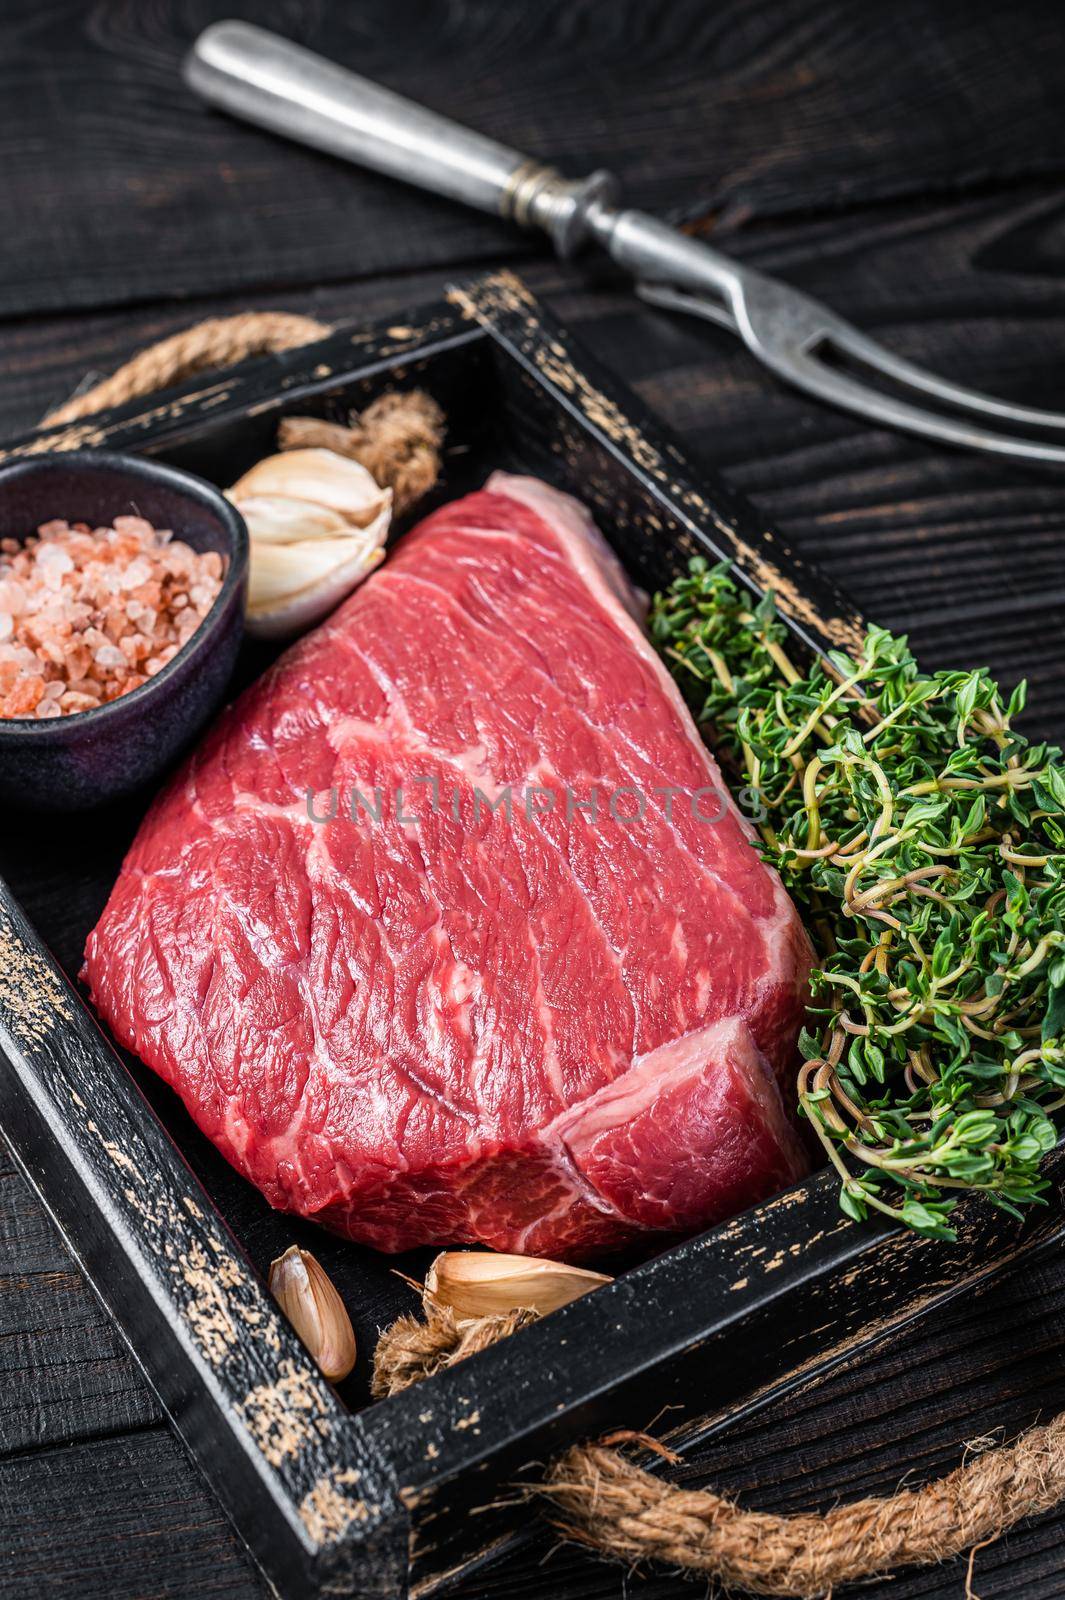 Raw top sirloin cap beef cut meat steak or Picanha in wooden tray with herbs. Black wooden background. Top view.